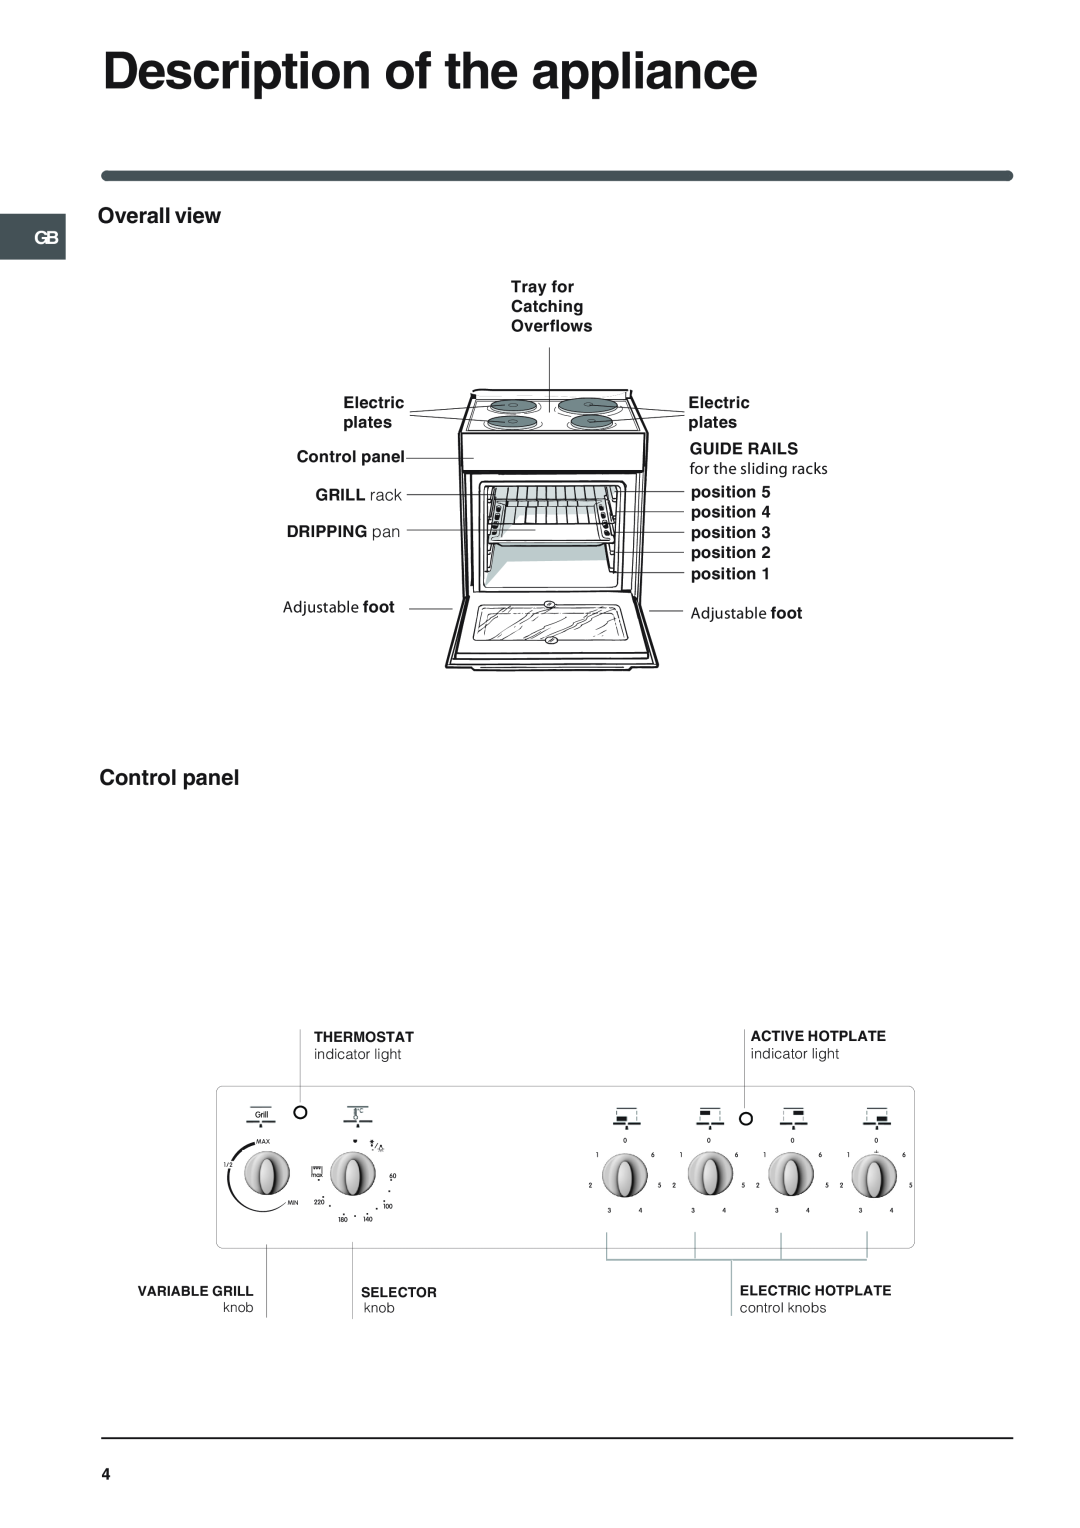 Indesit I6 manual Description of the appliance, Overall view, Control panel, Adjustable foot 